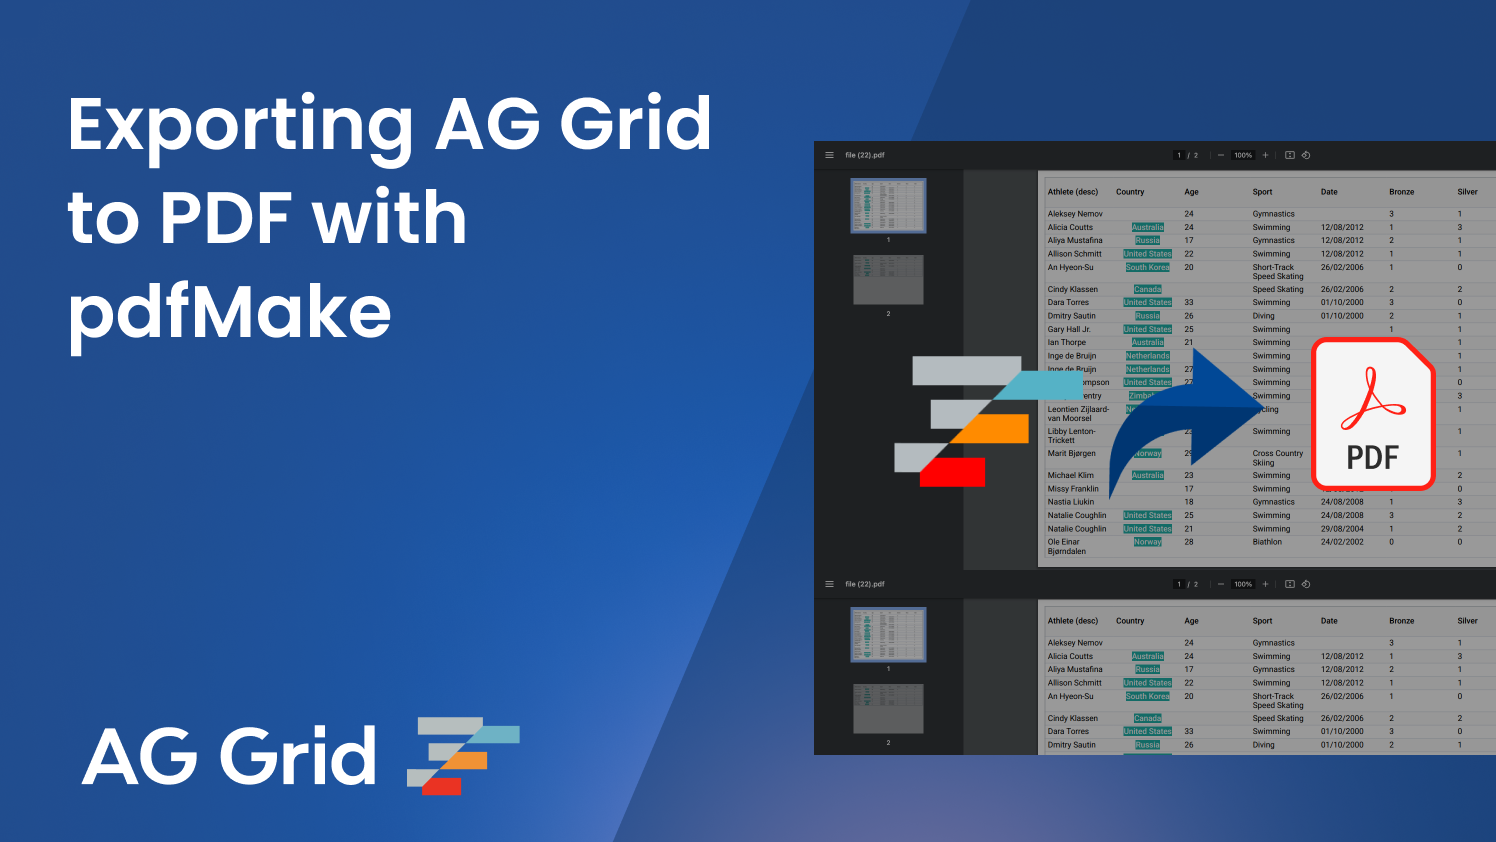 Feature image showing AG Grid export to PDF